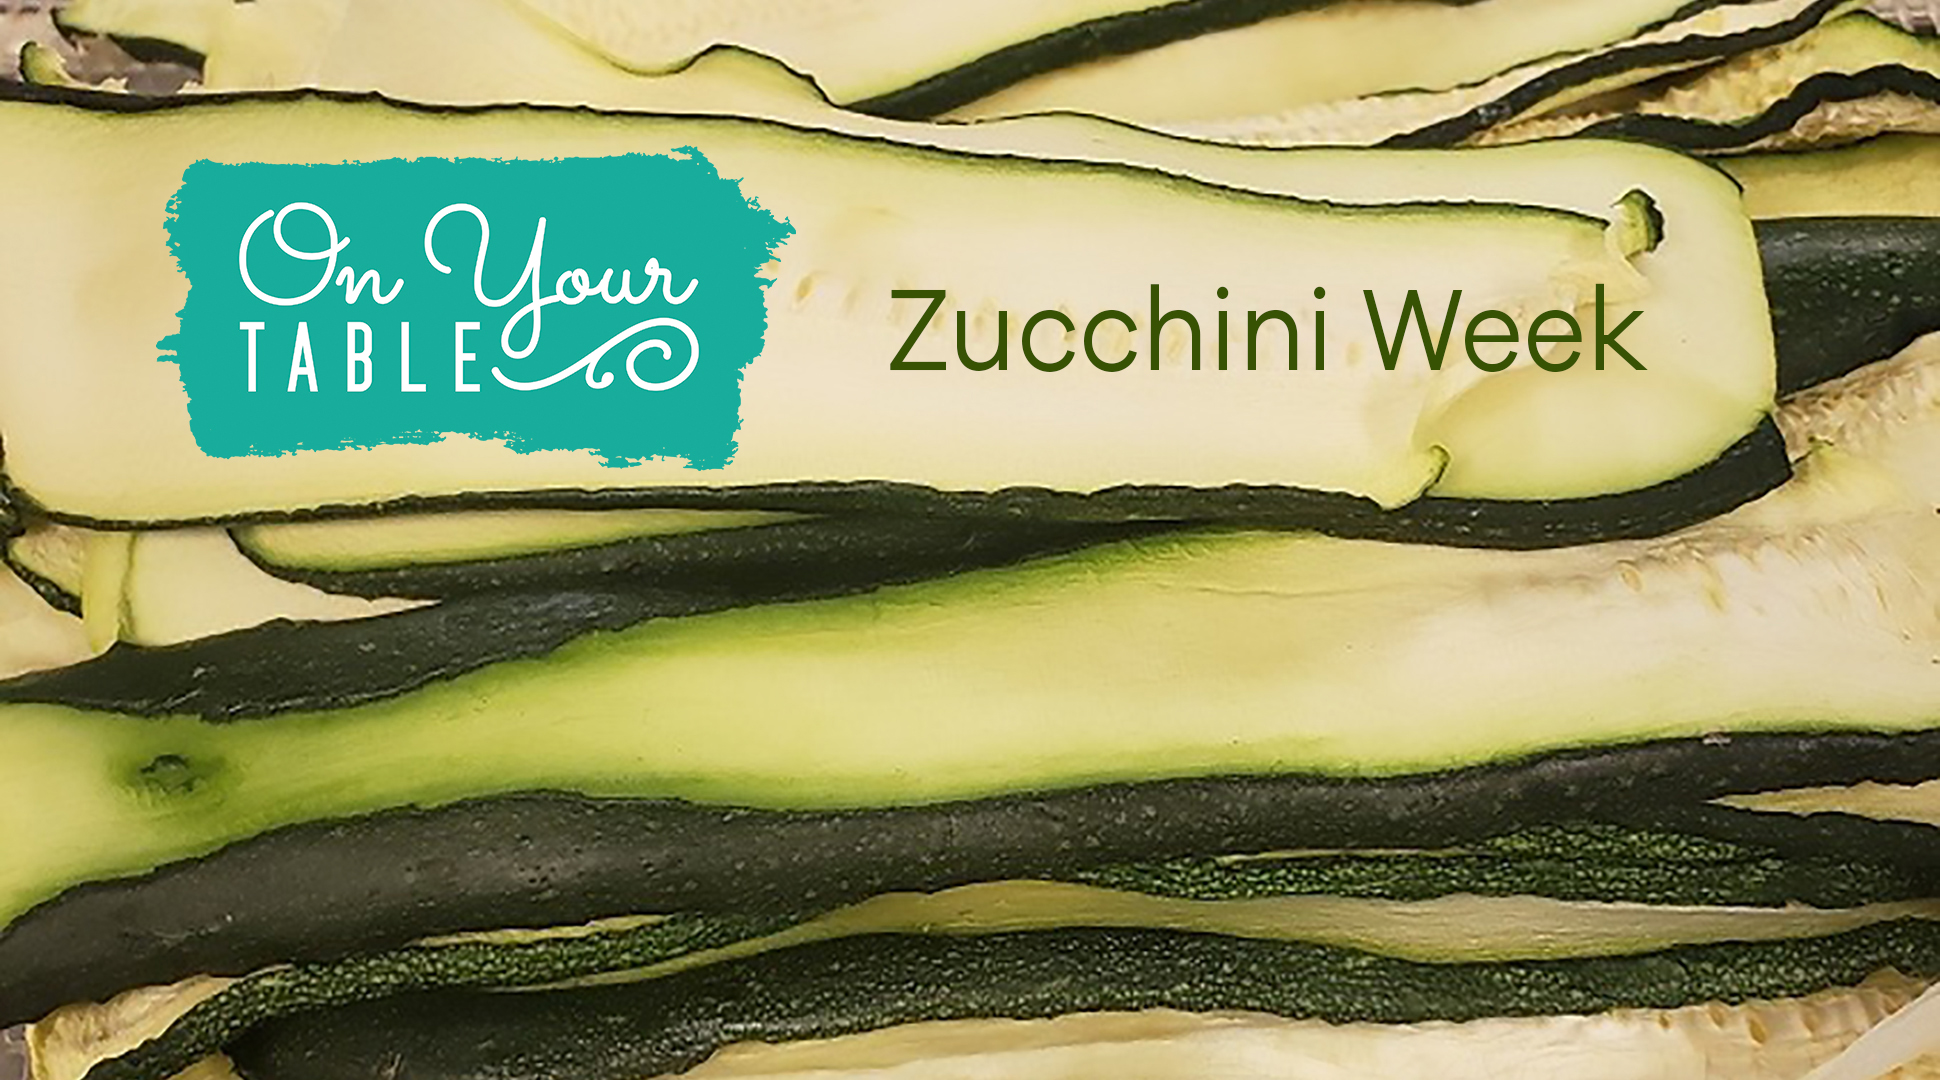 It's Zucchini Week at OYT